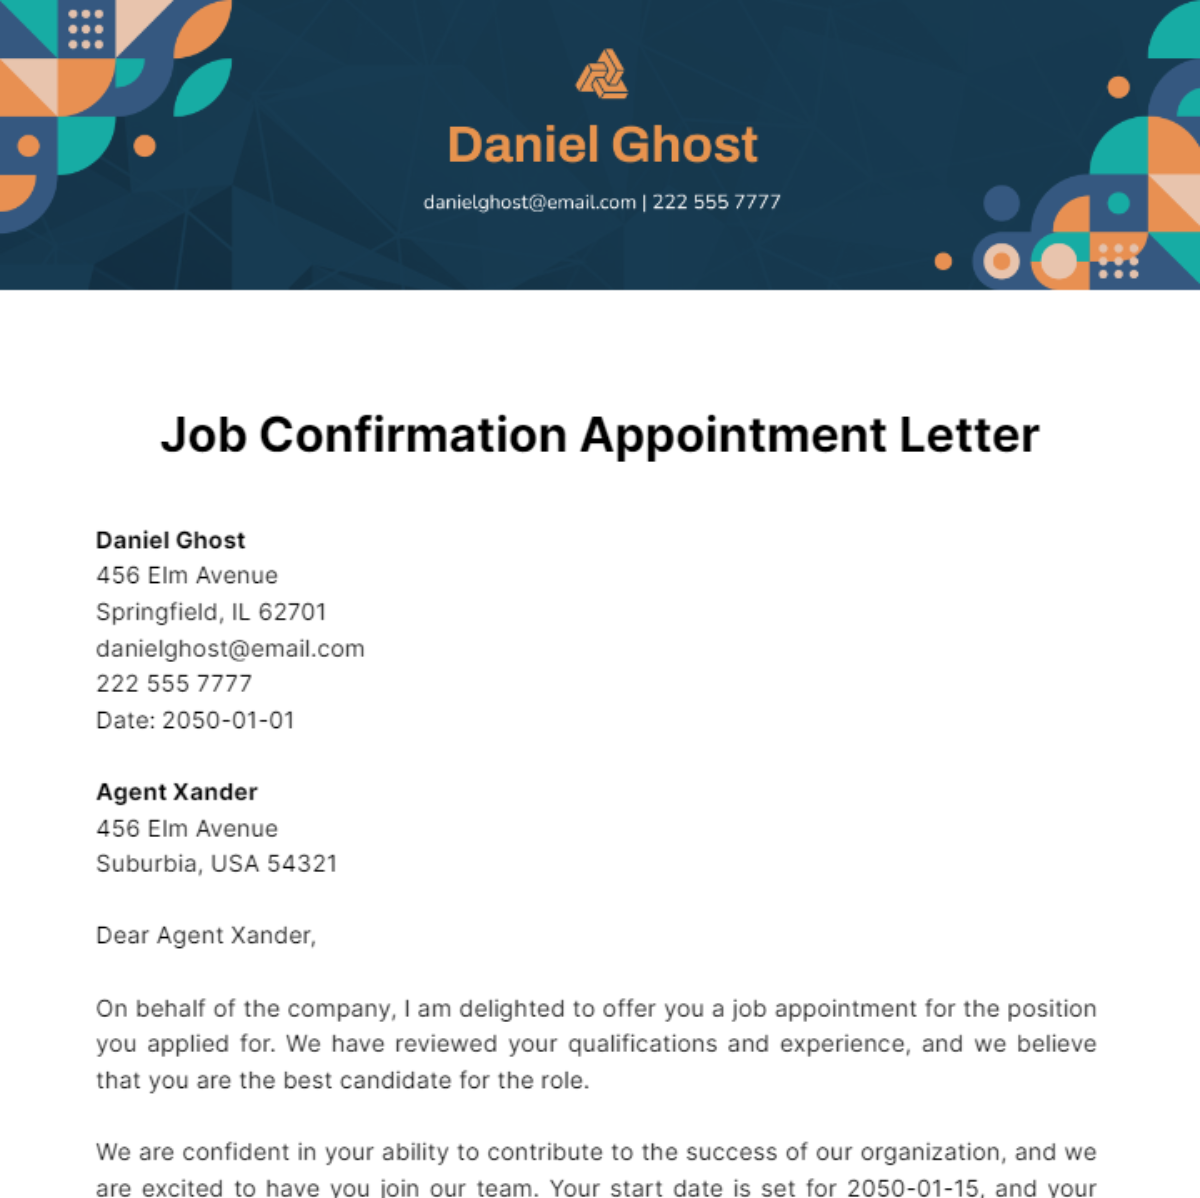 Job Confirmation Appointment Letter Template